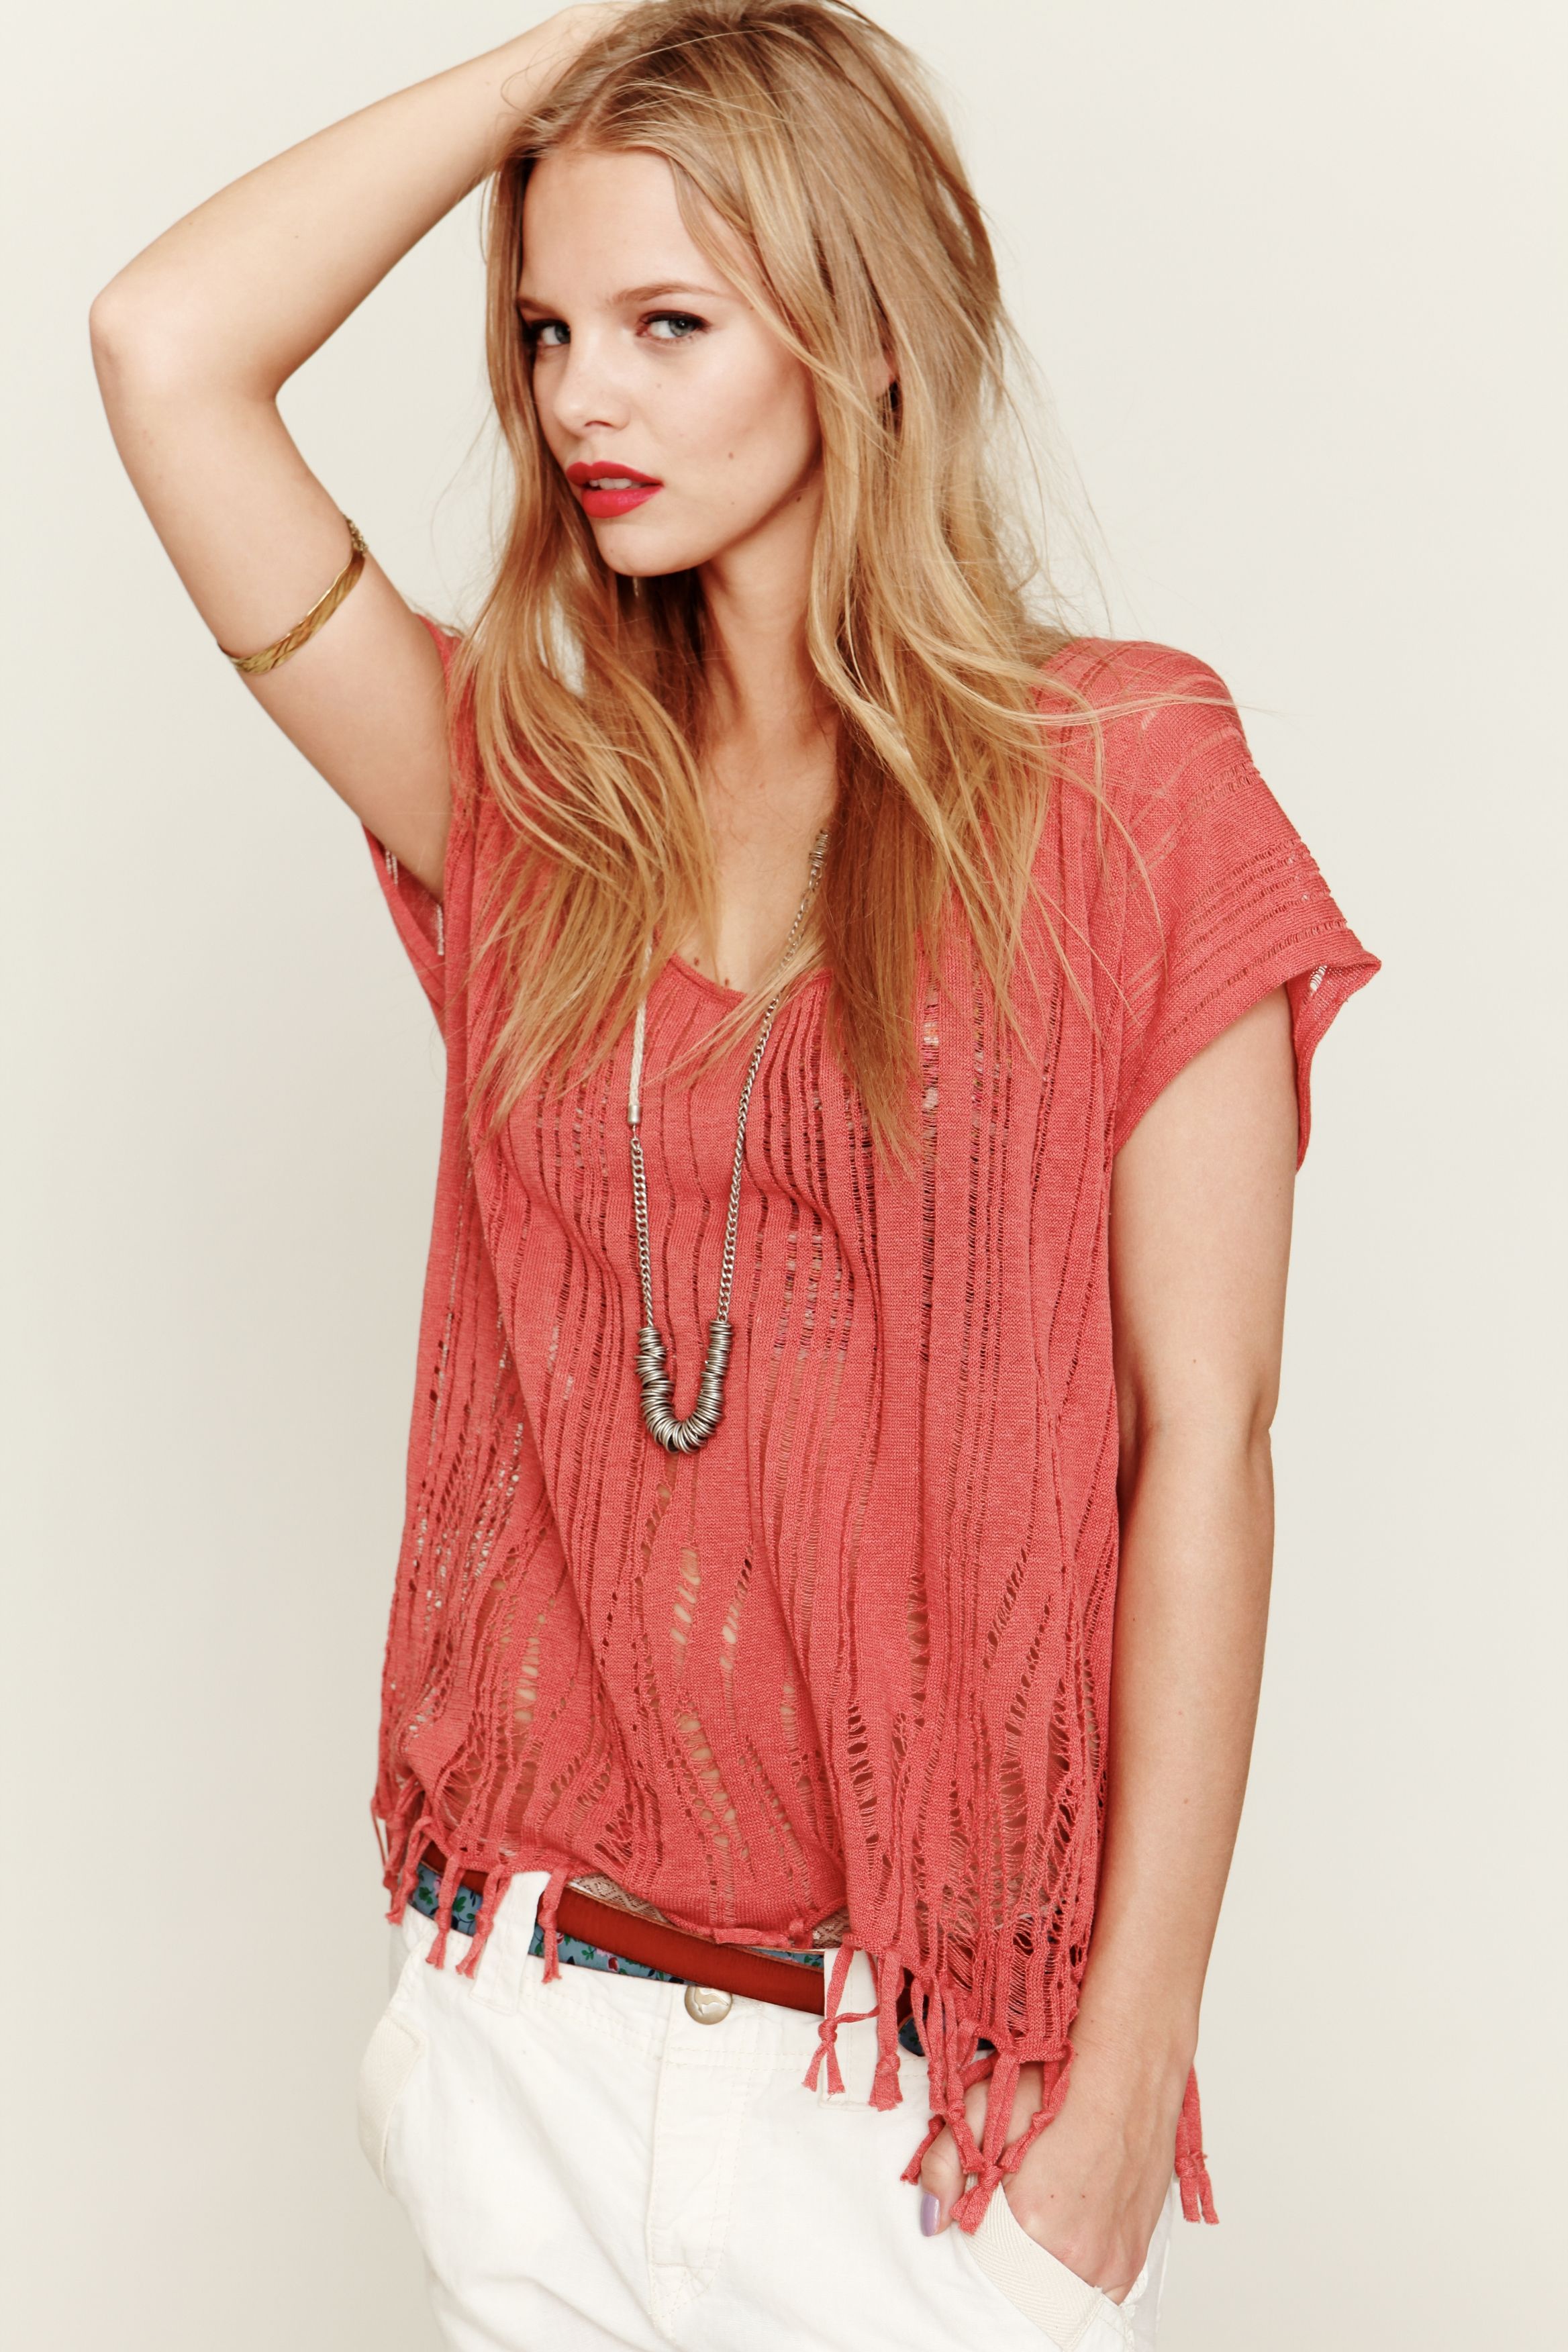 Free People February 2011 Look Book 7